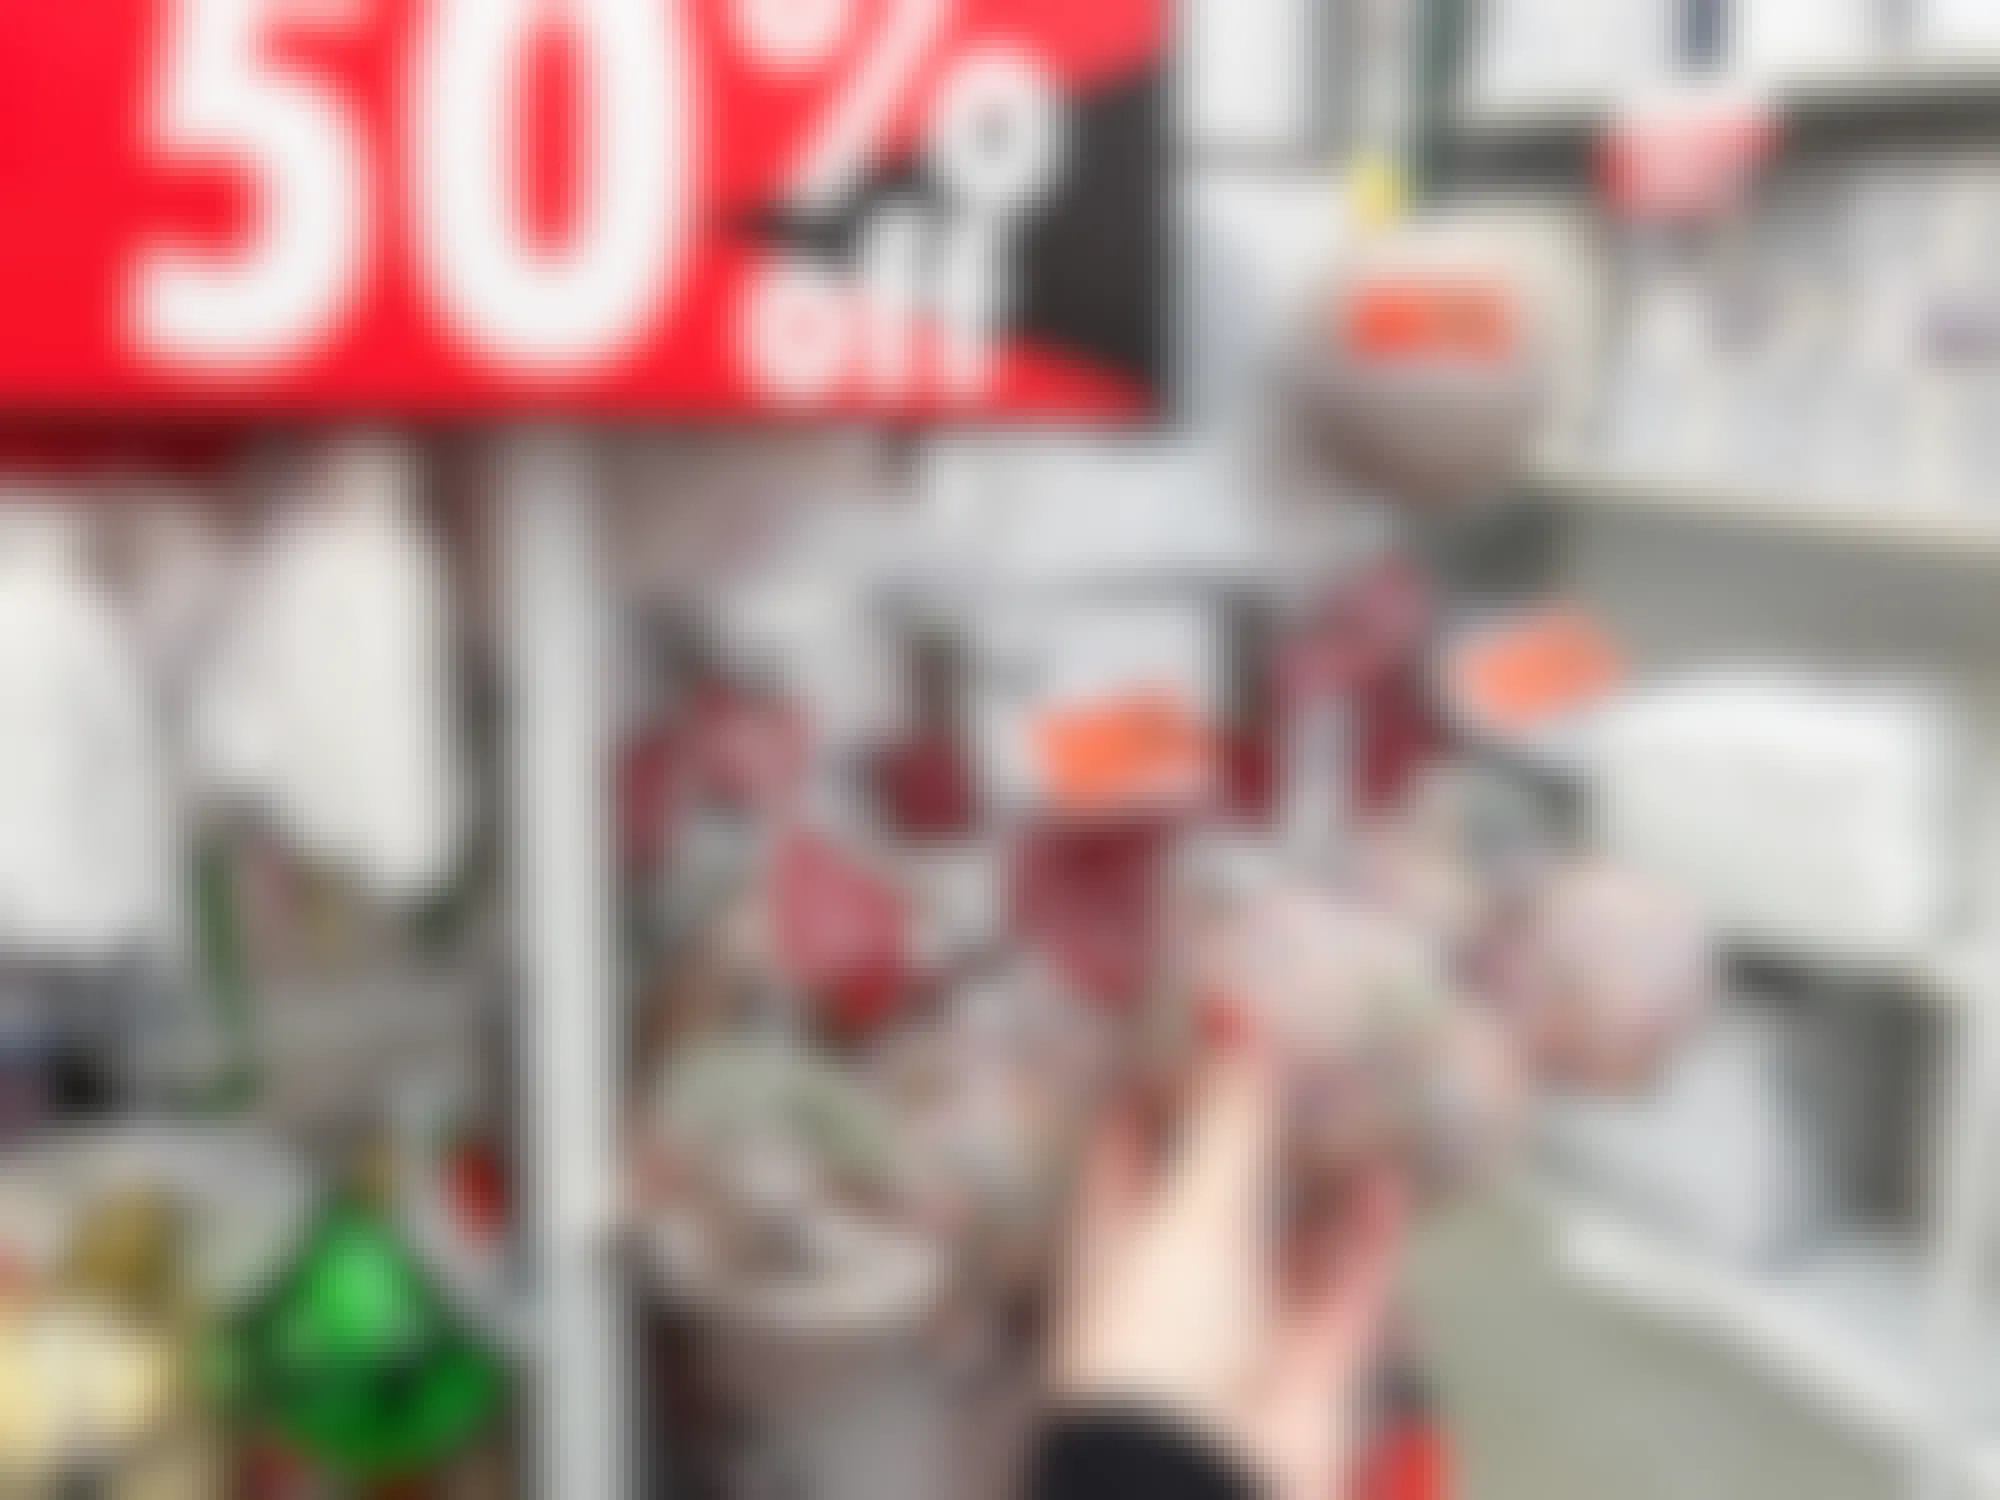 christmas ornaments clearance at closing bed bath and beyond store